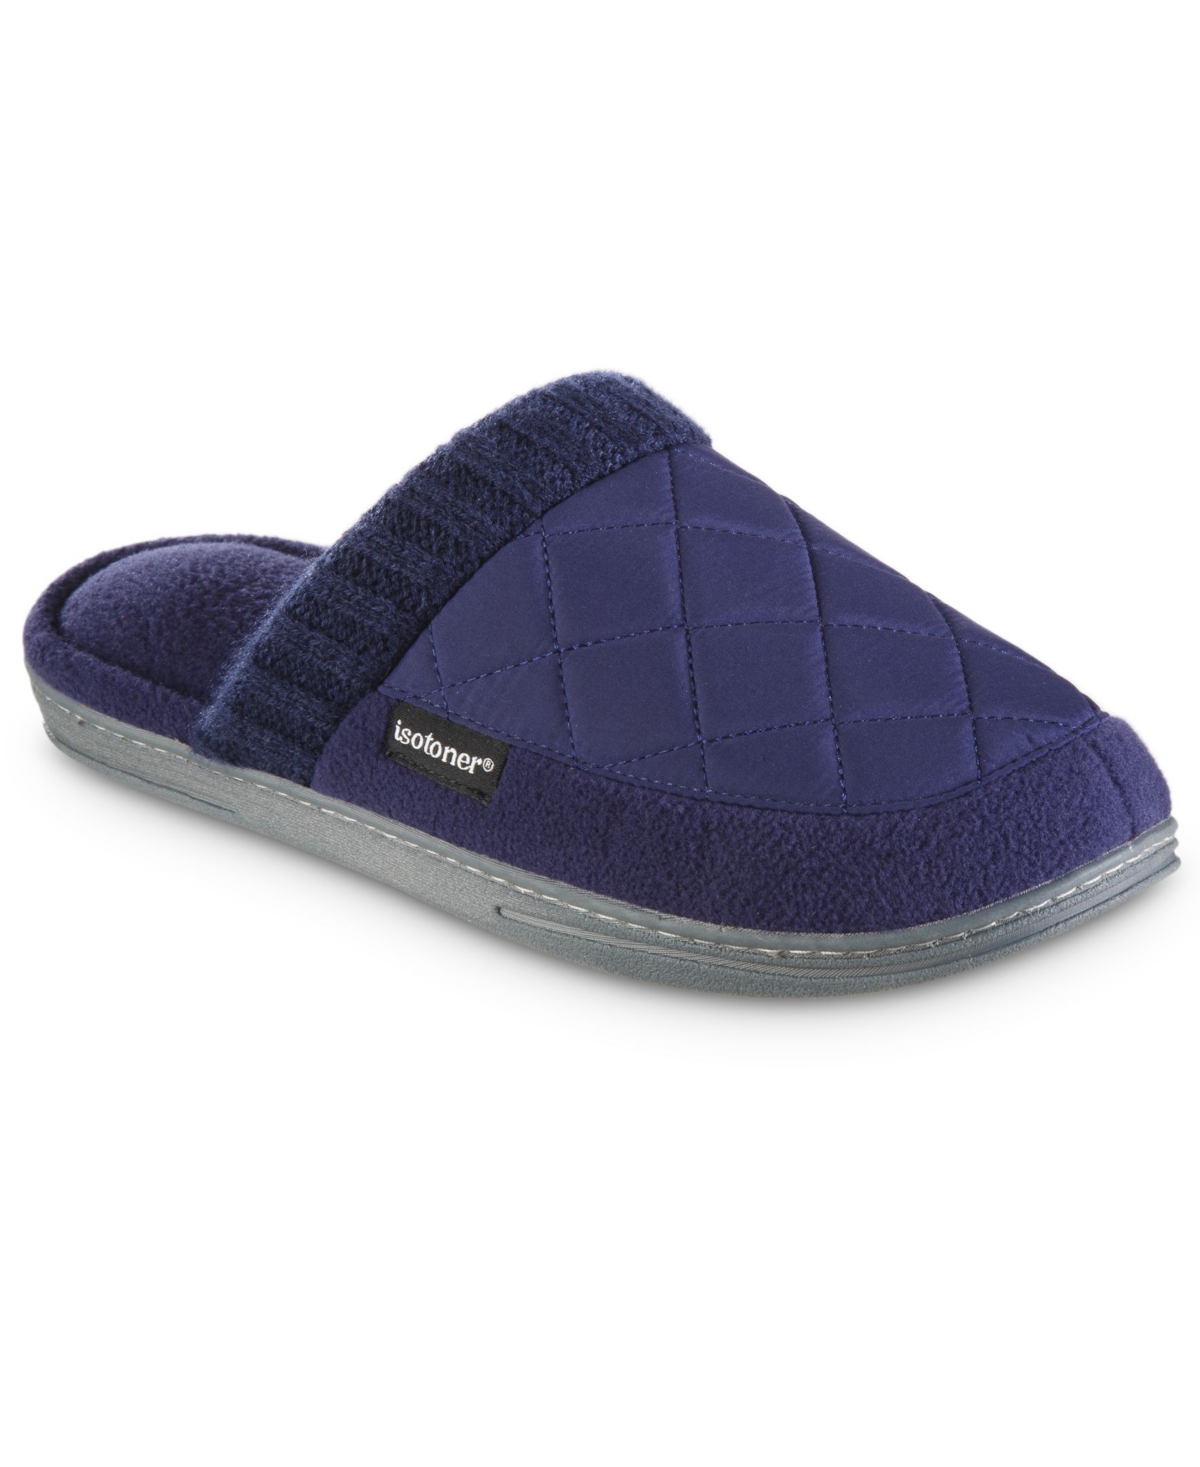 Men's Memory Foam Quilted Levon Clog Slippers - Navy Blue